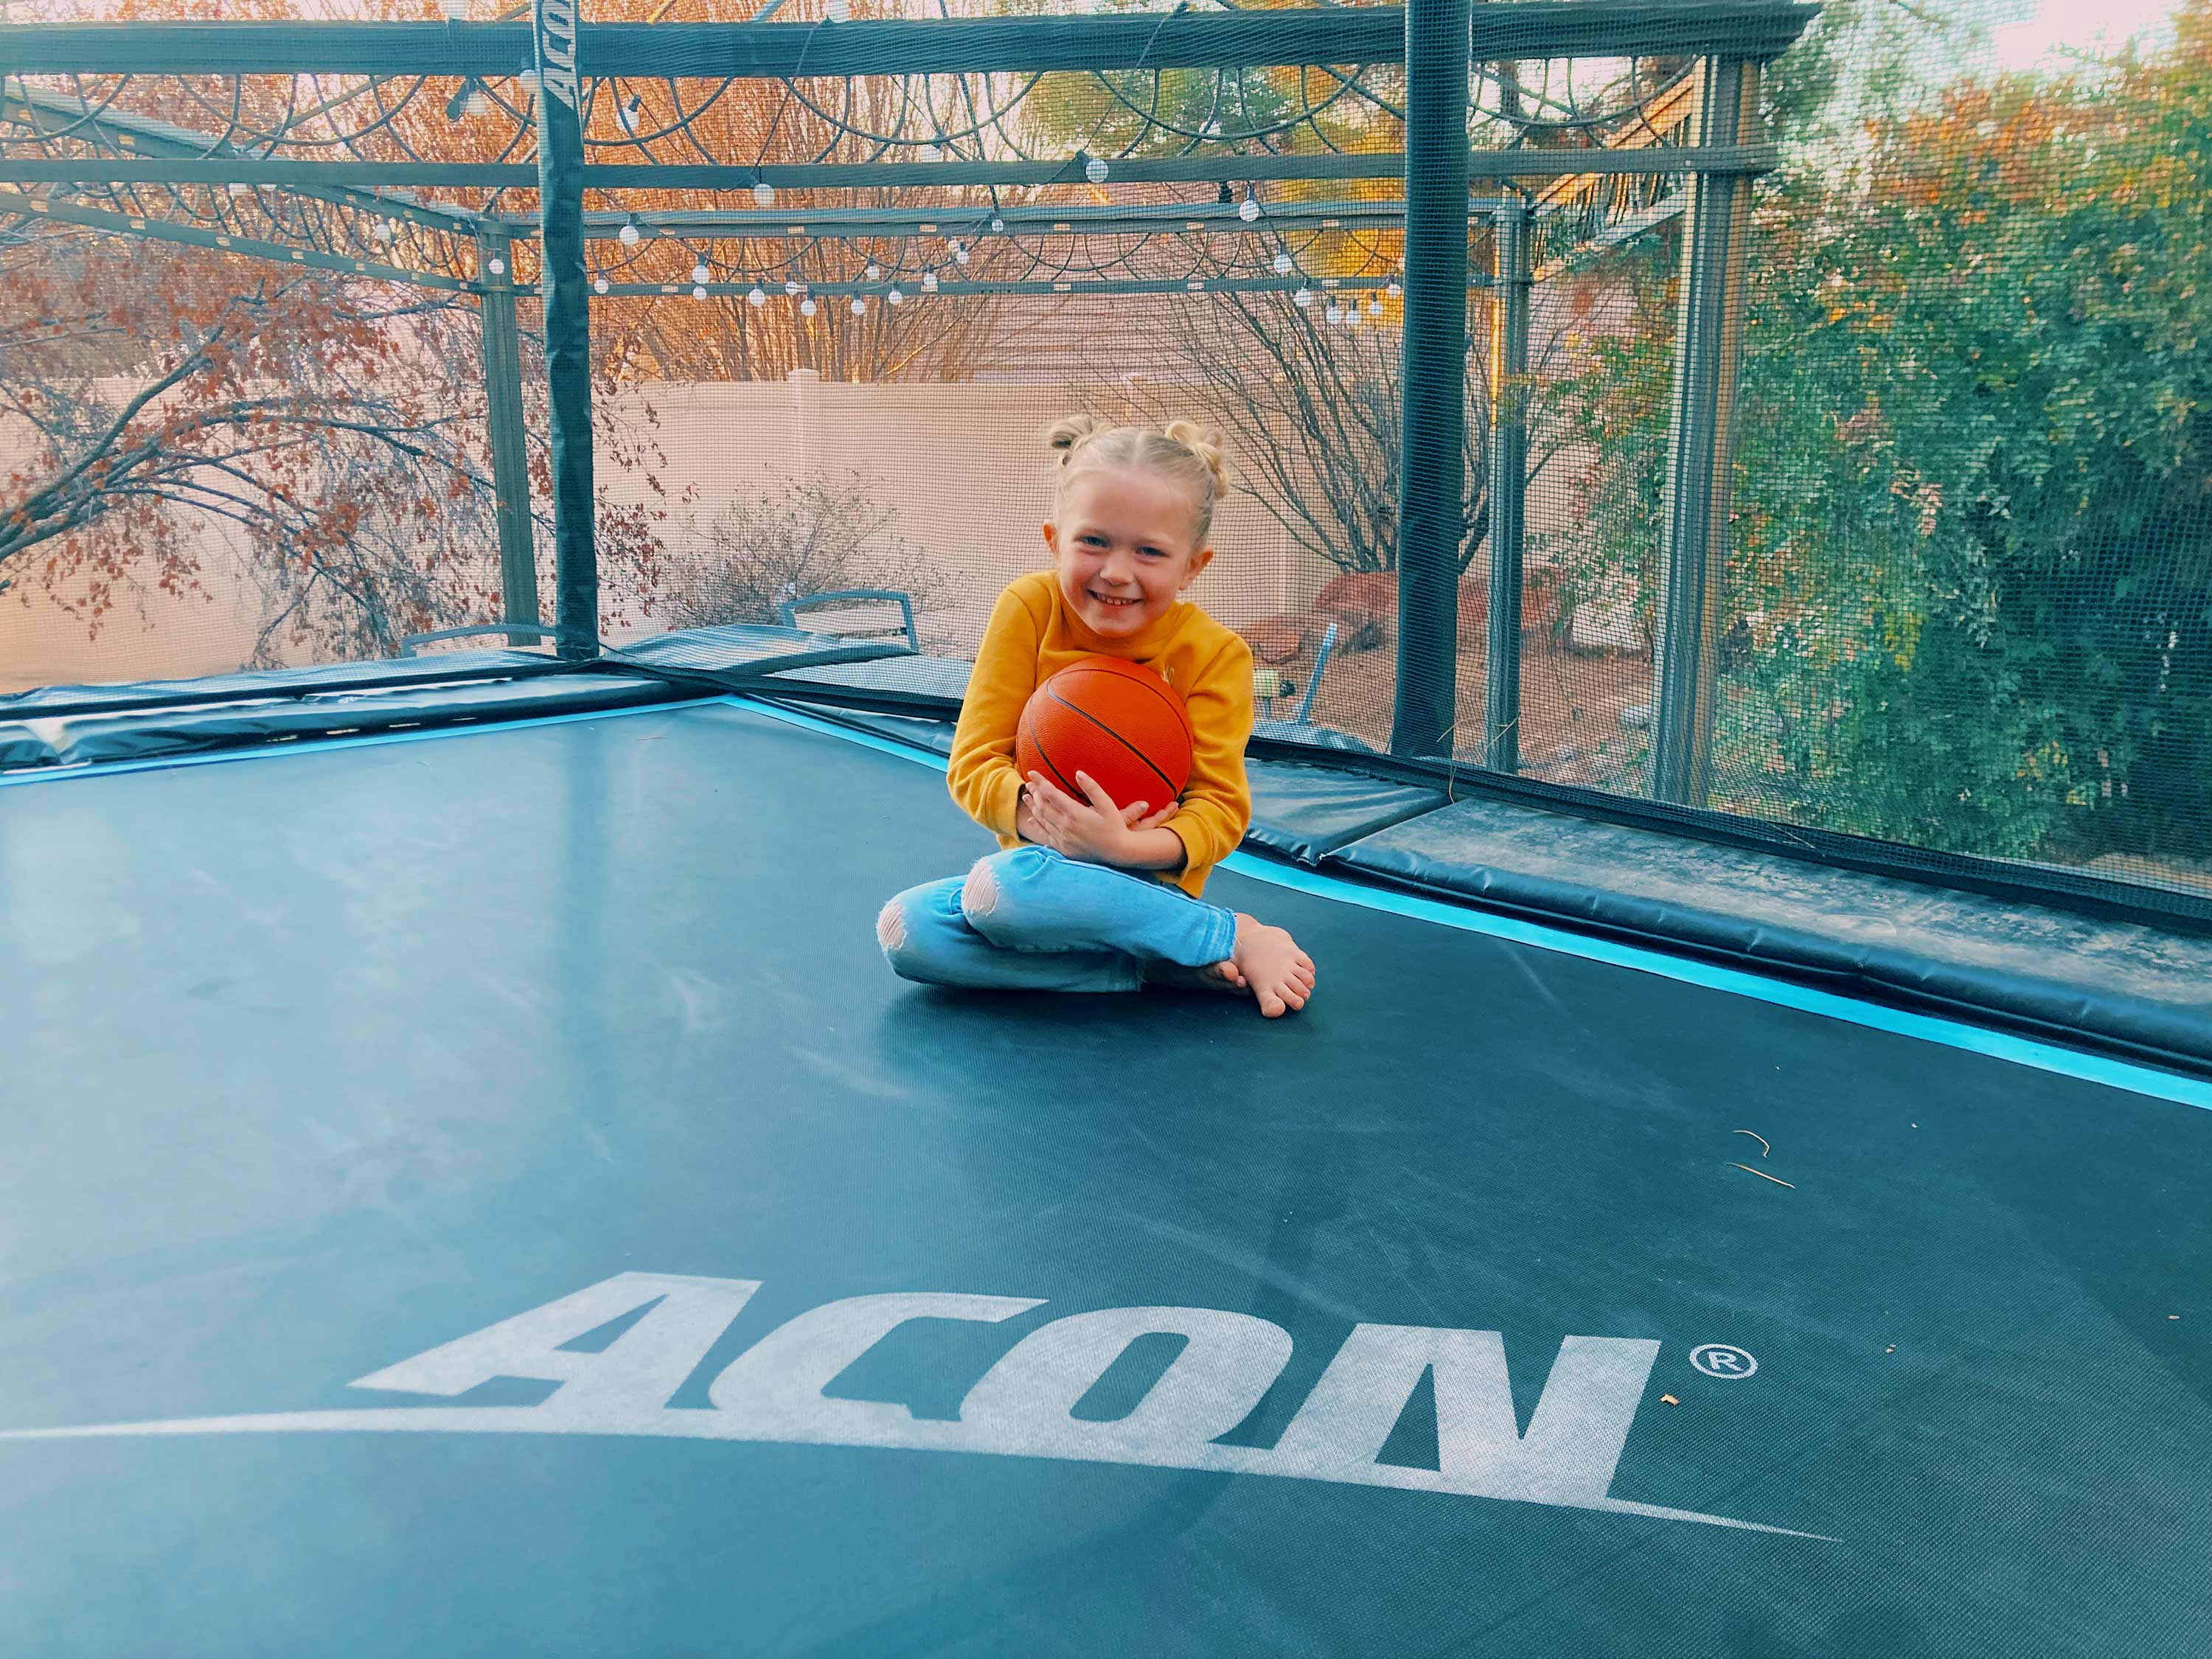 A happy girl sitting on a trampoline and holding a basketball in her arms